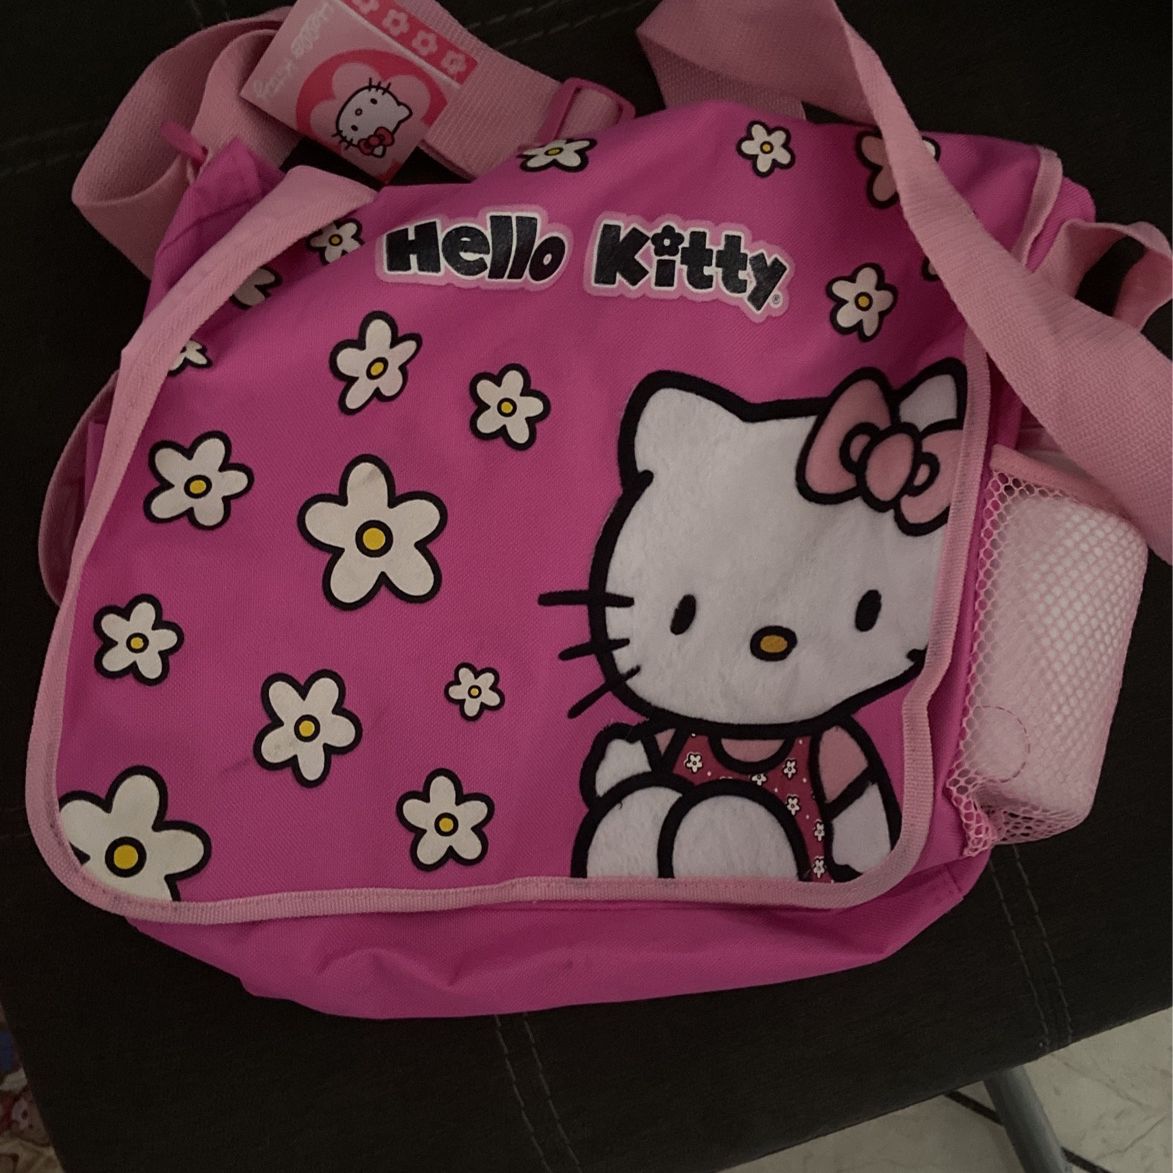 Chadwicks' Picture Place: Hello Kitty Messenger Bag